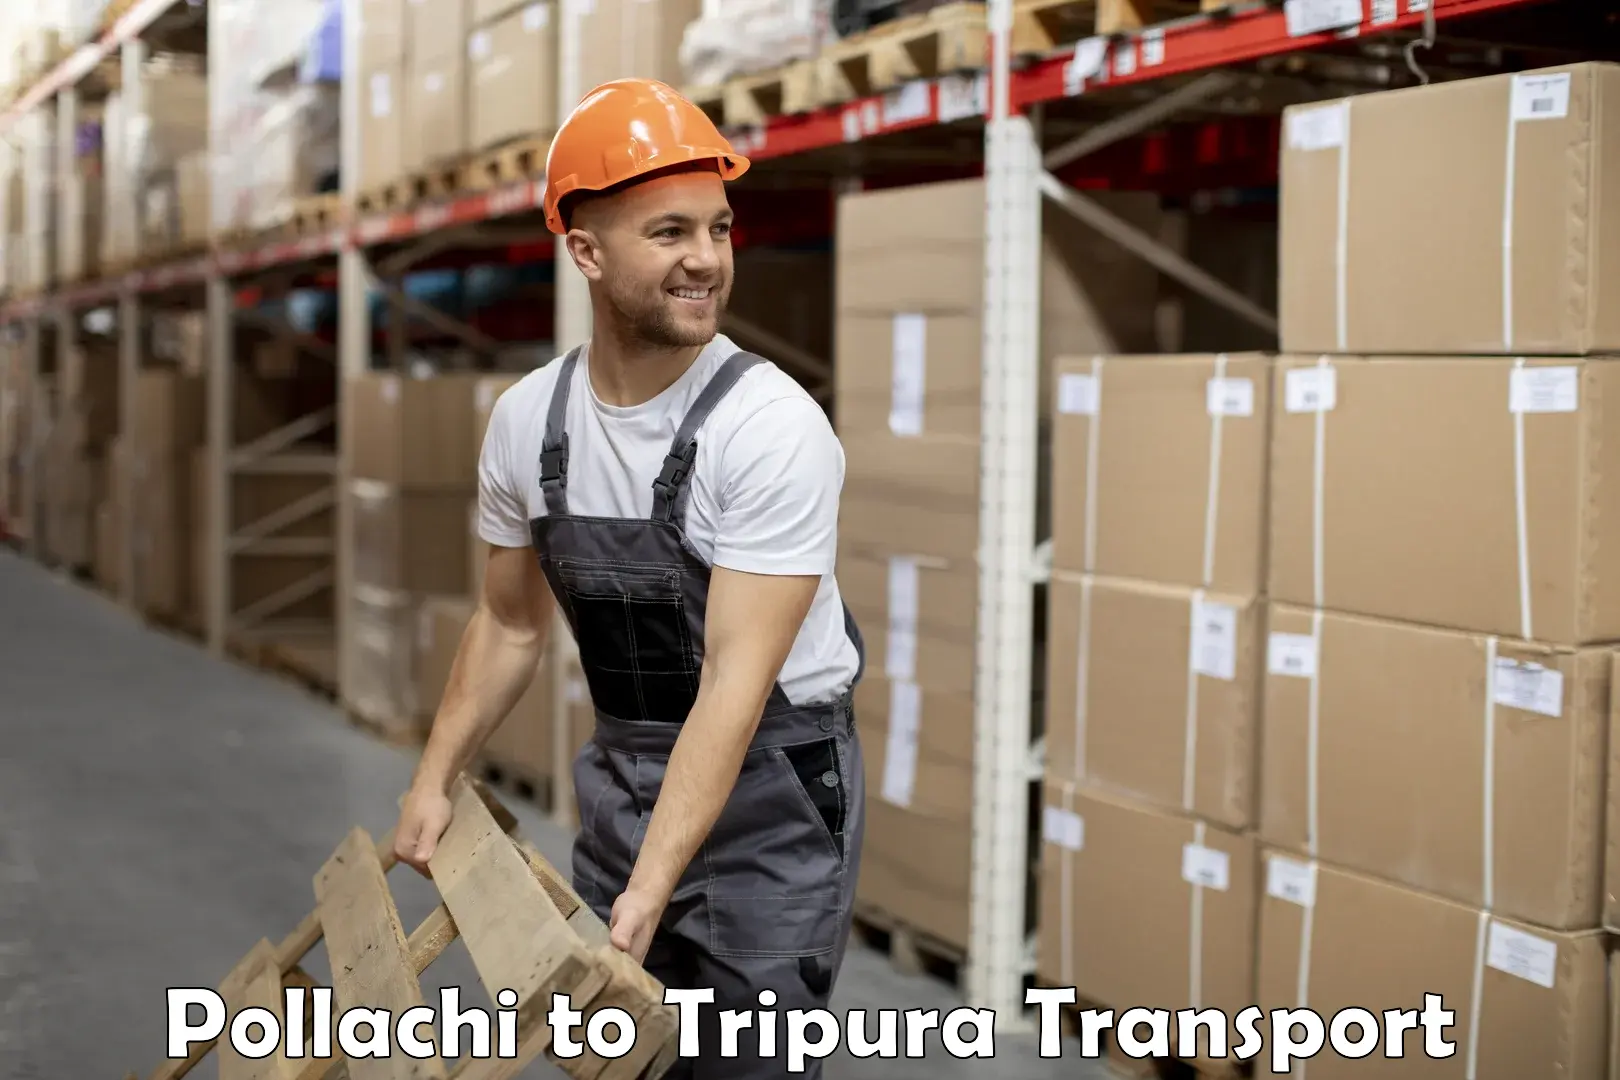 Goods delivery service Pollachi to Udaipur Tripura